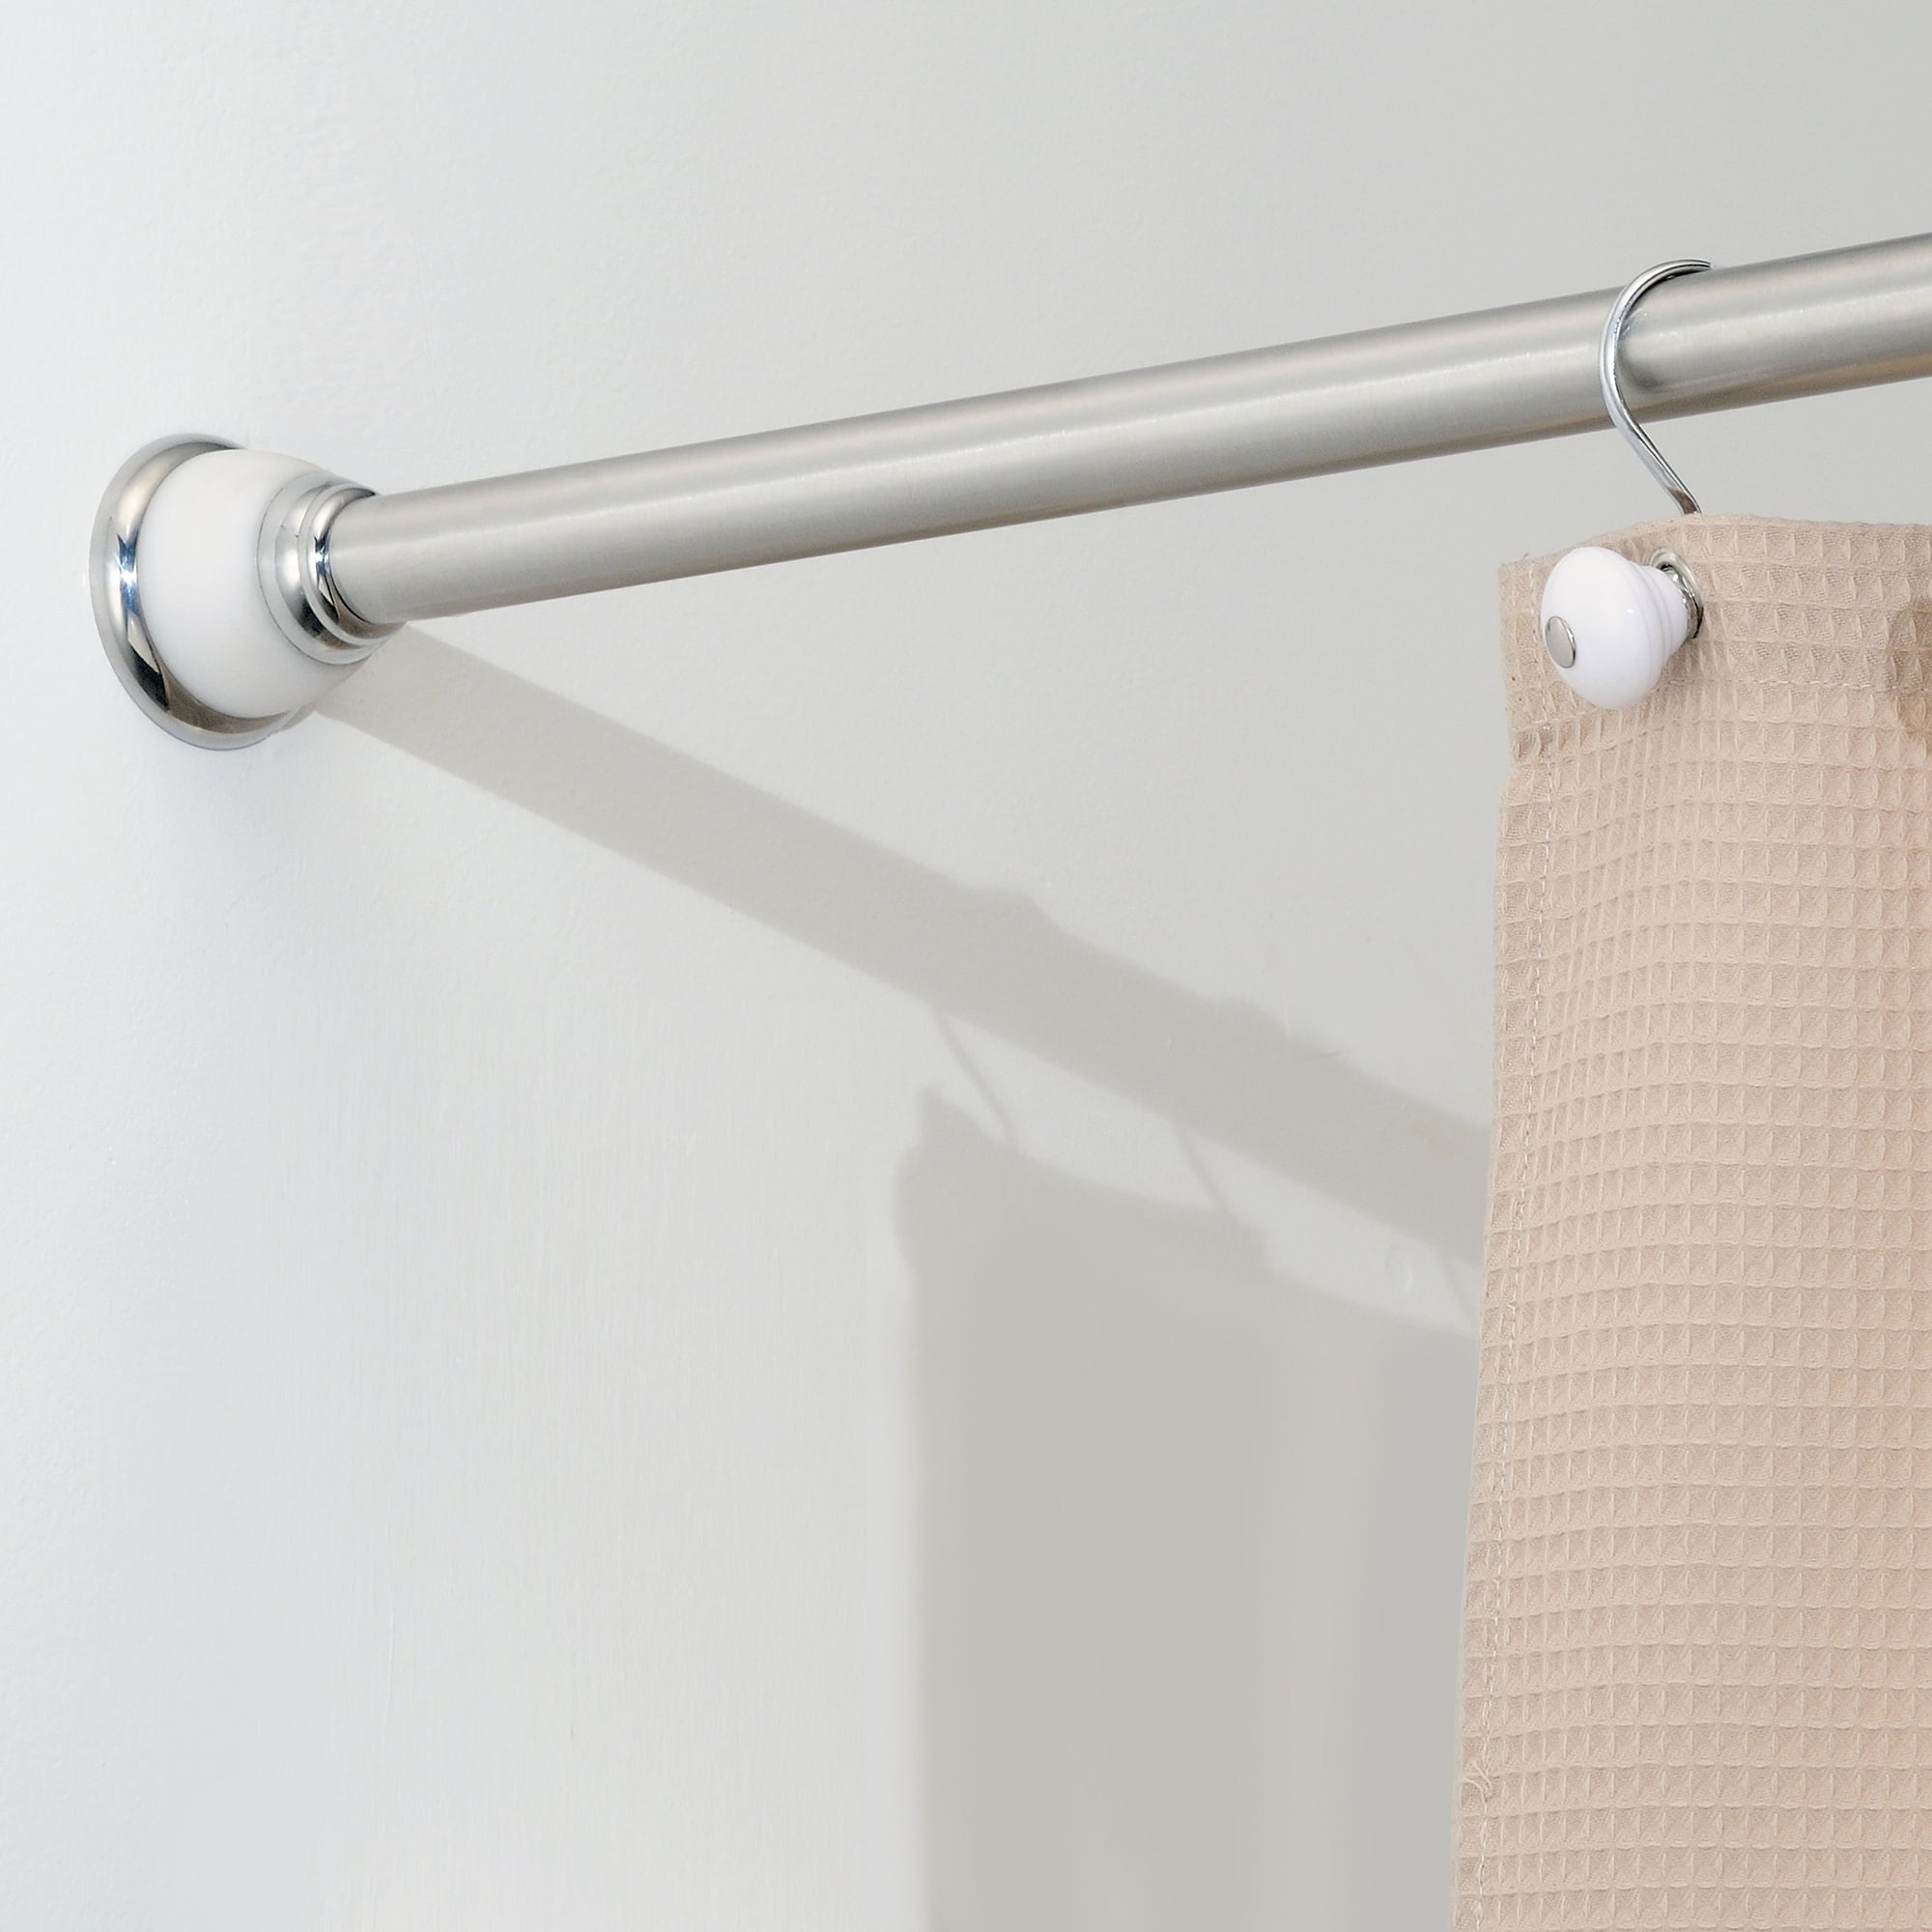 Shower Curtain Tension Rod, No Rust Shower Curtain Rod